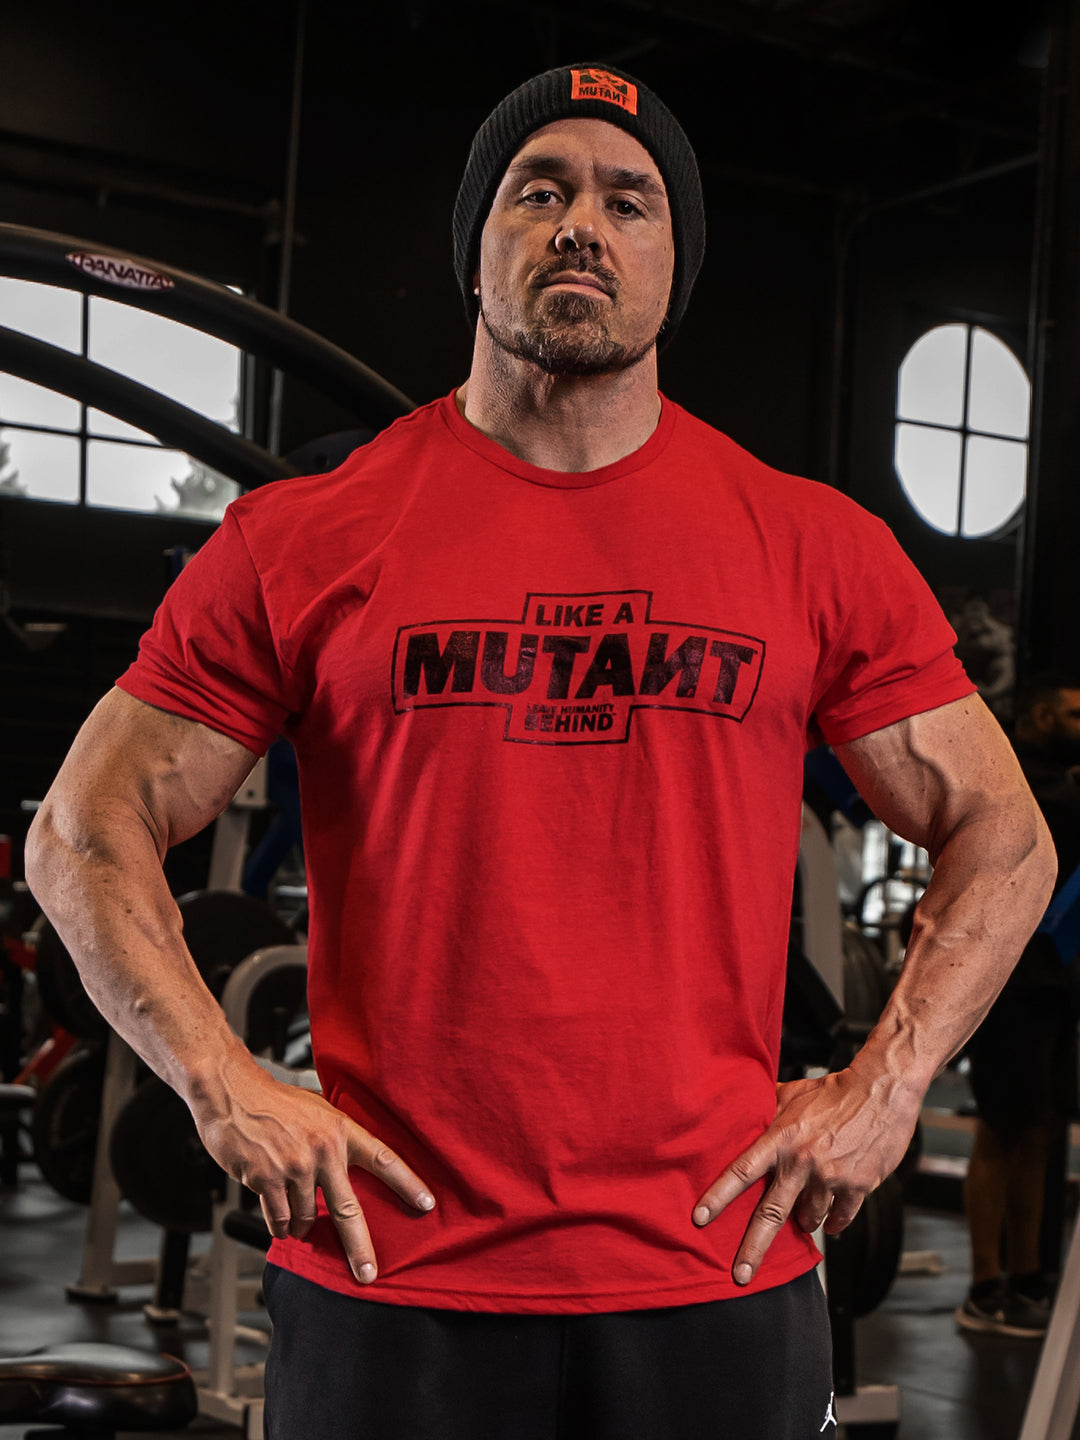 Big Ron Partlow at the gym, staring at the camera while wearing the red 'MUTANT's Truck Month' t-shirt, which features the 'Like a Mutant' phrase and 'Leave Humanity Behind' tagline in black.